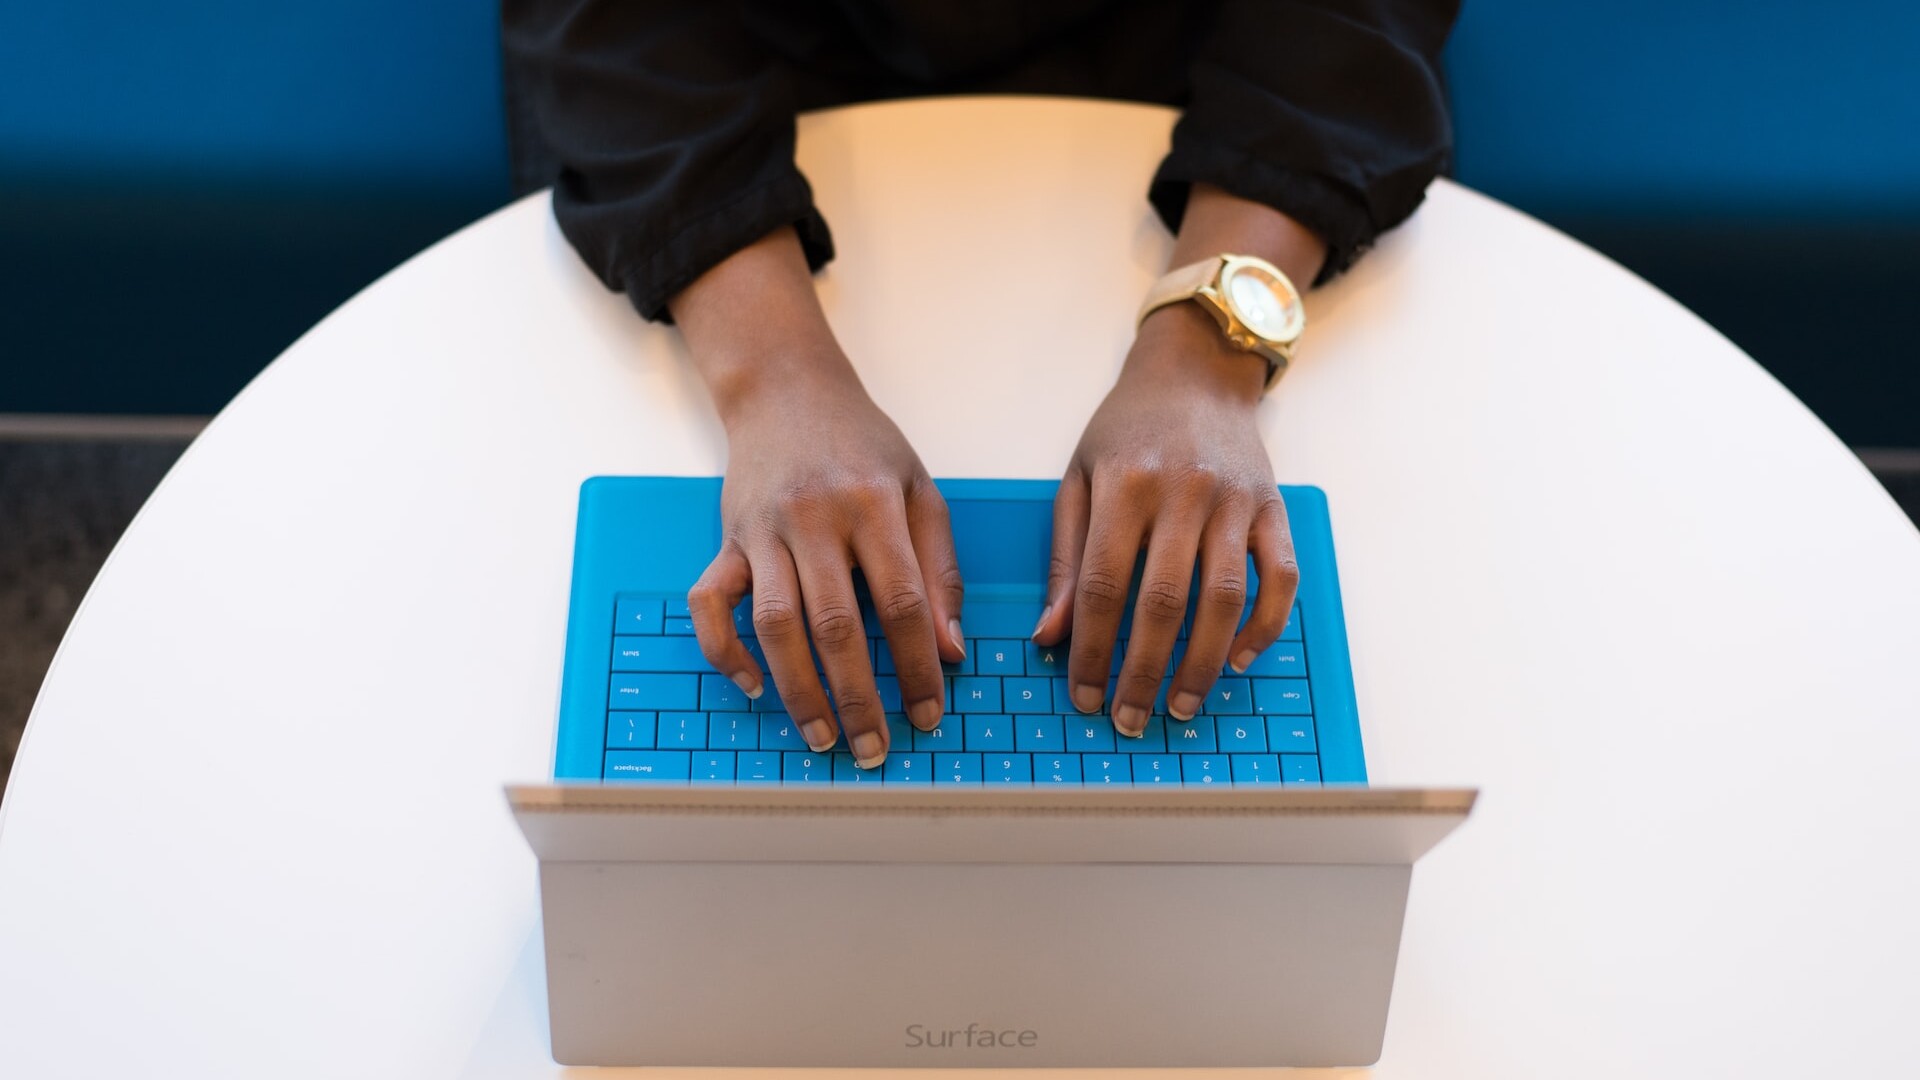 User working on laptop with a blue keyboard.